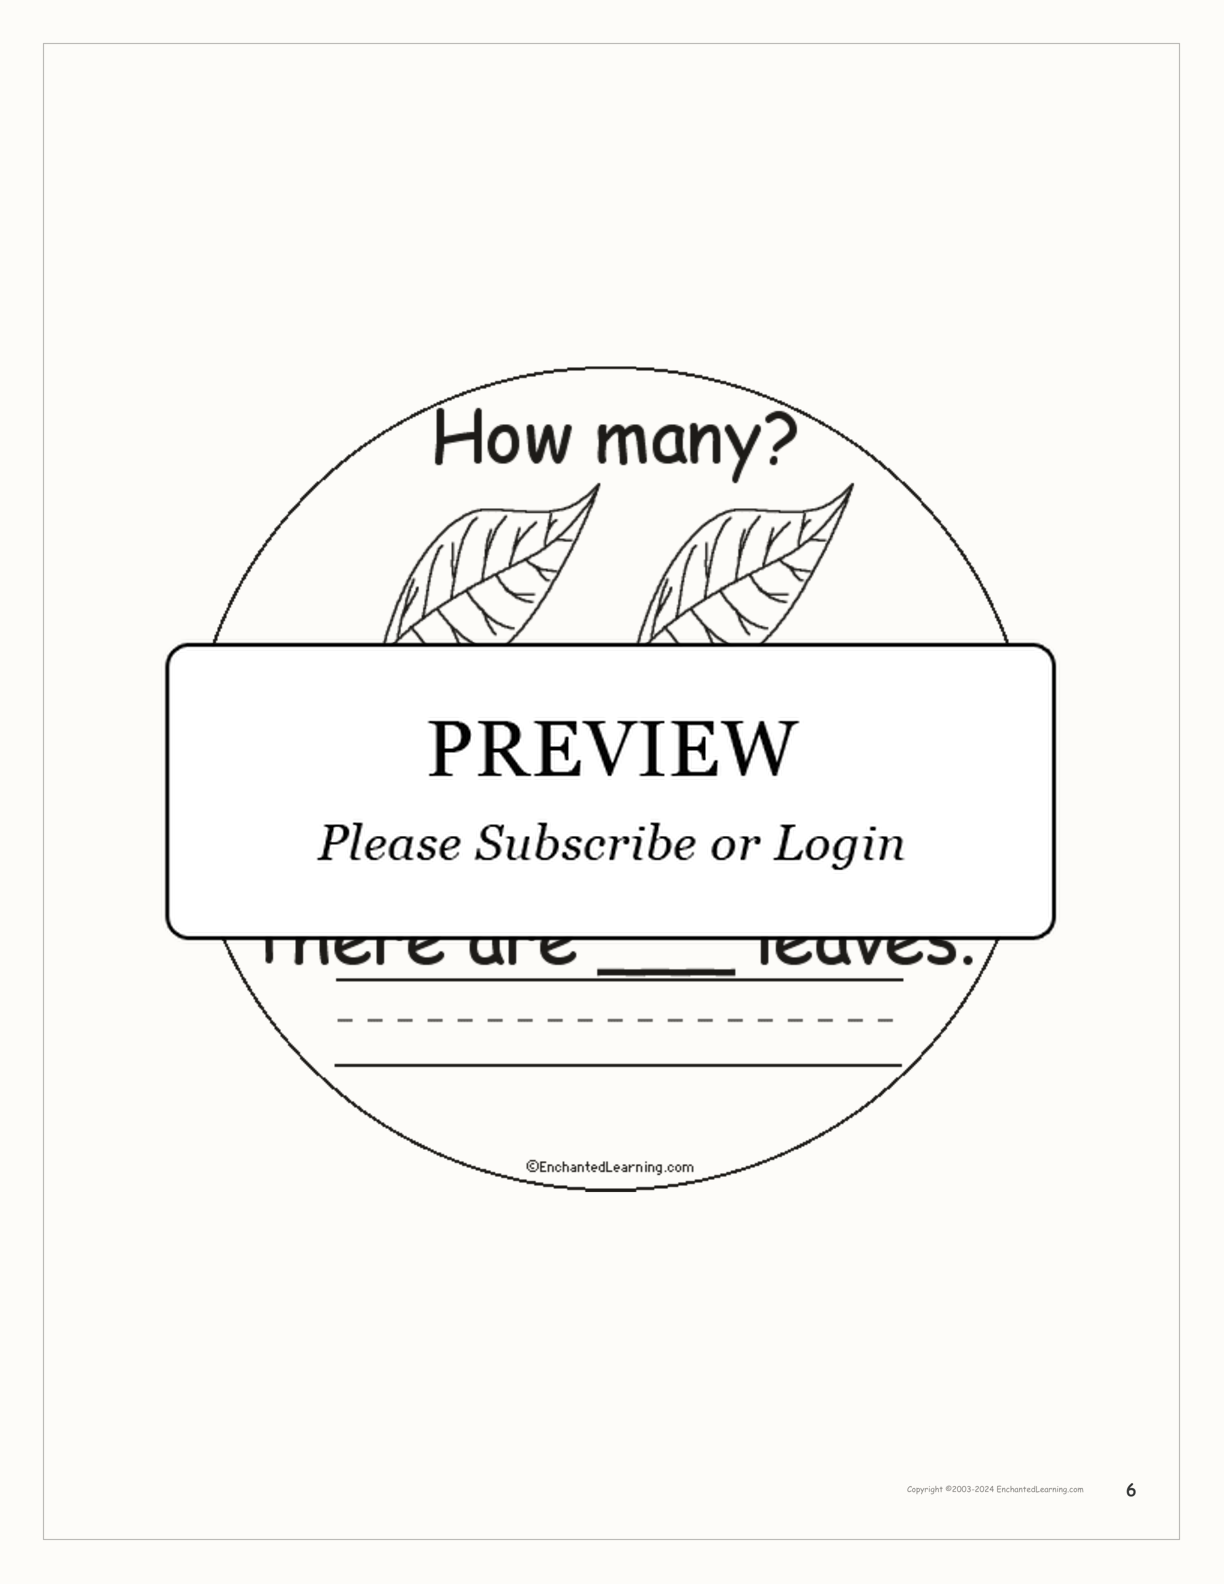 How Many Leaves? interactive printout page 6